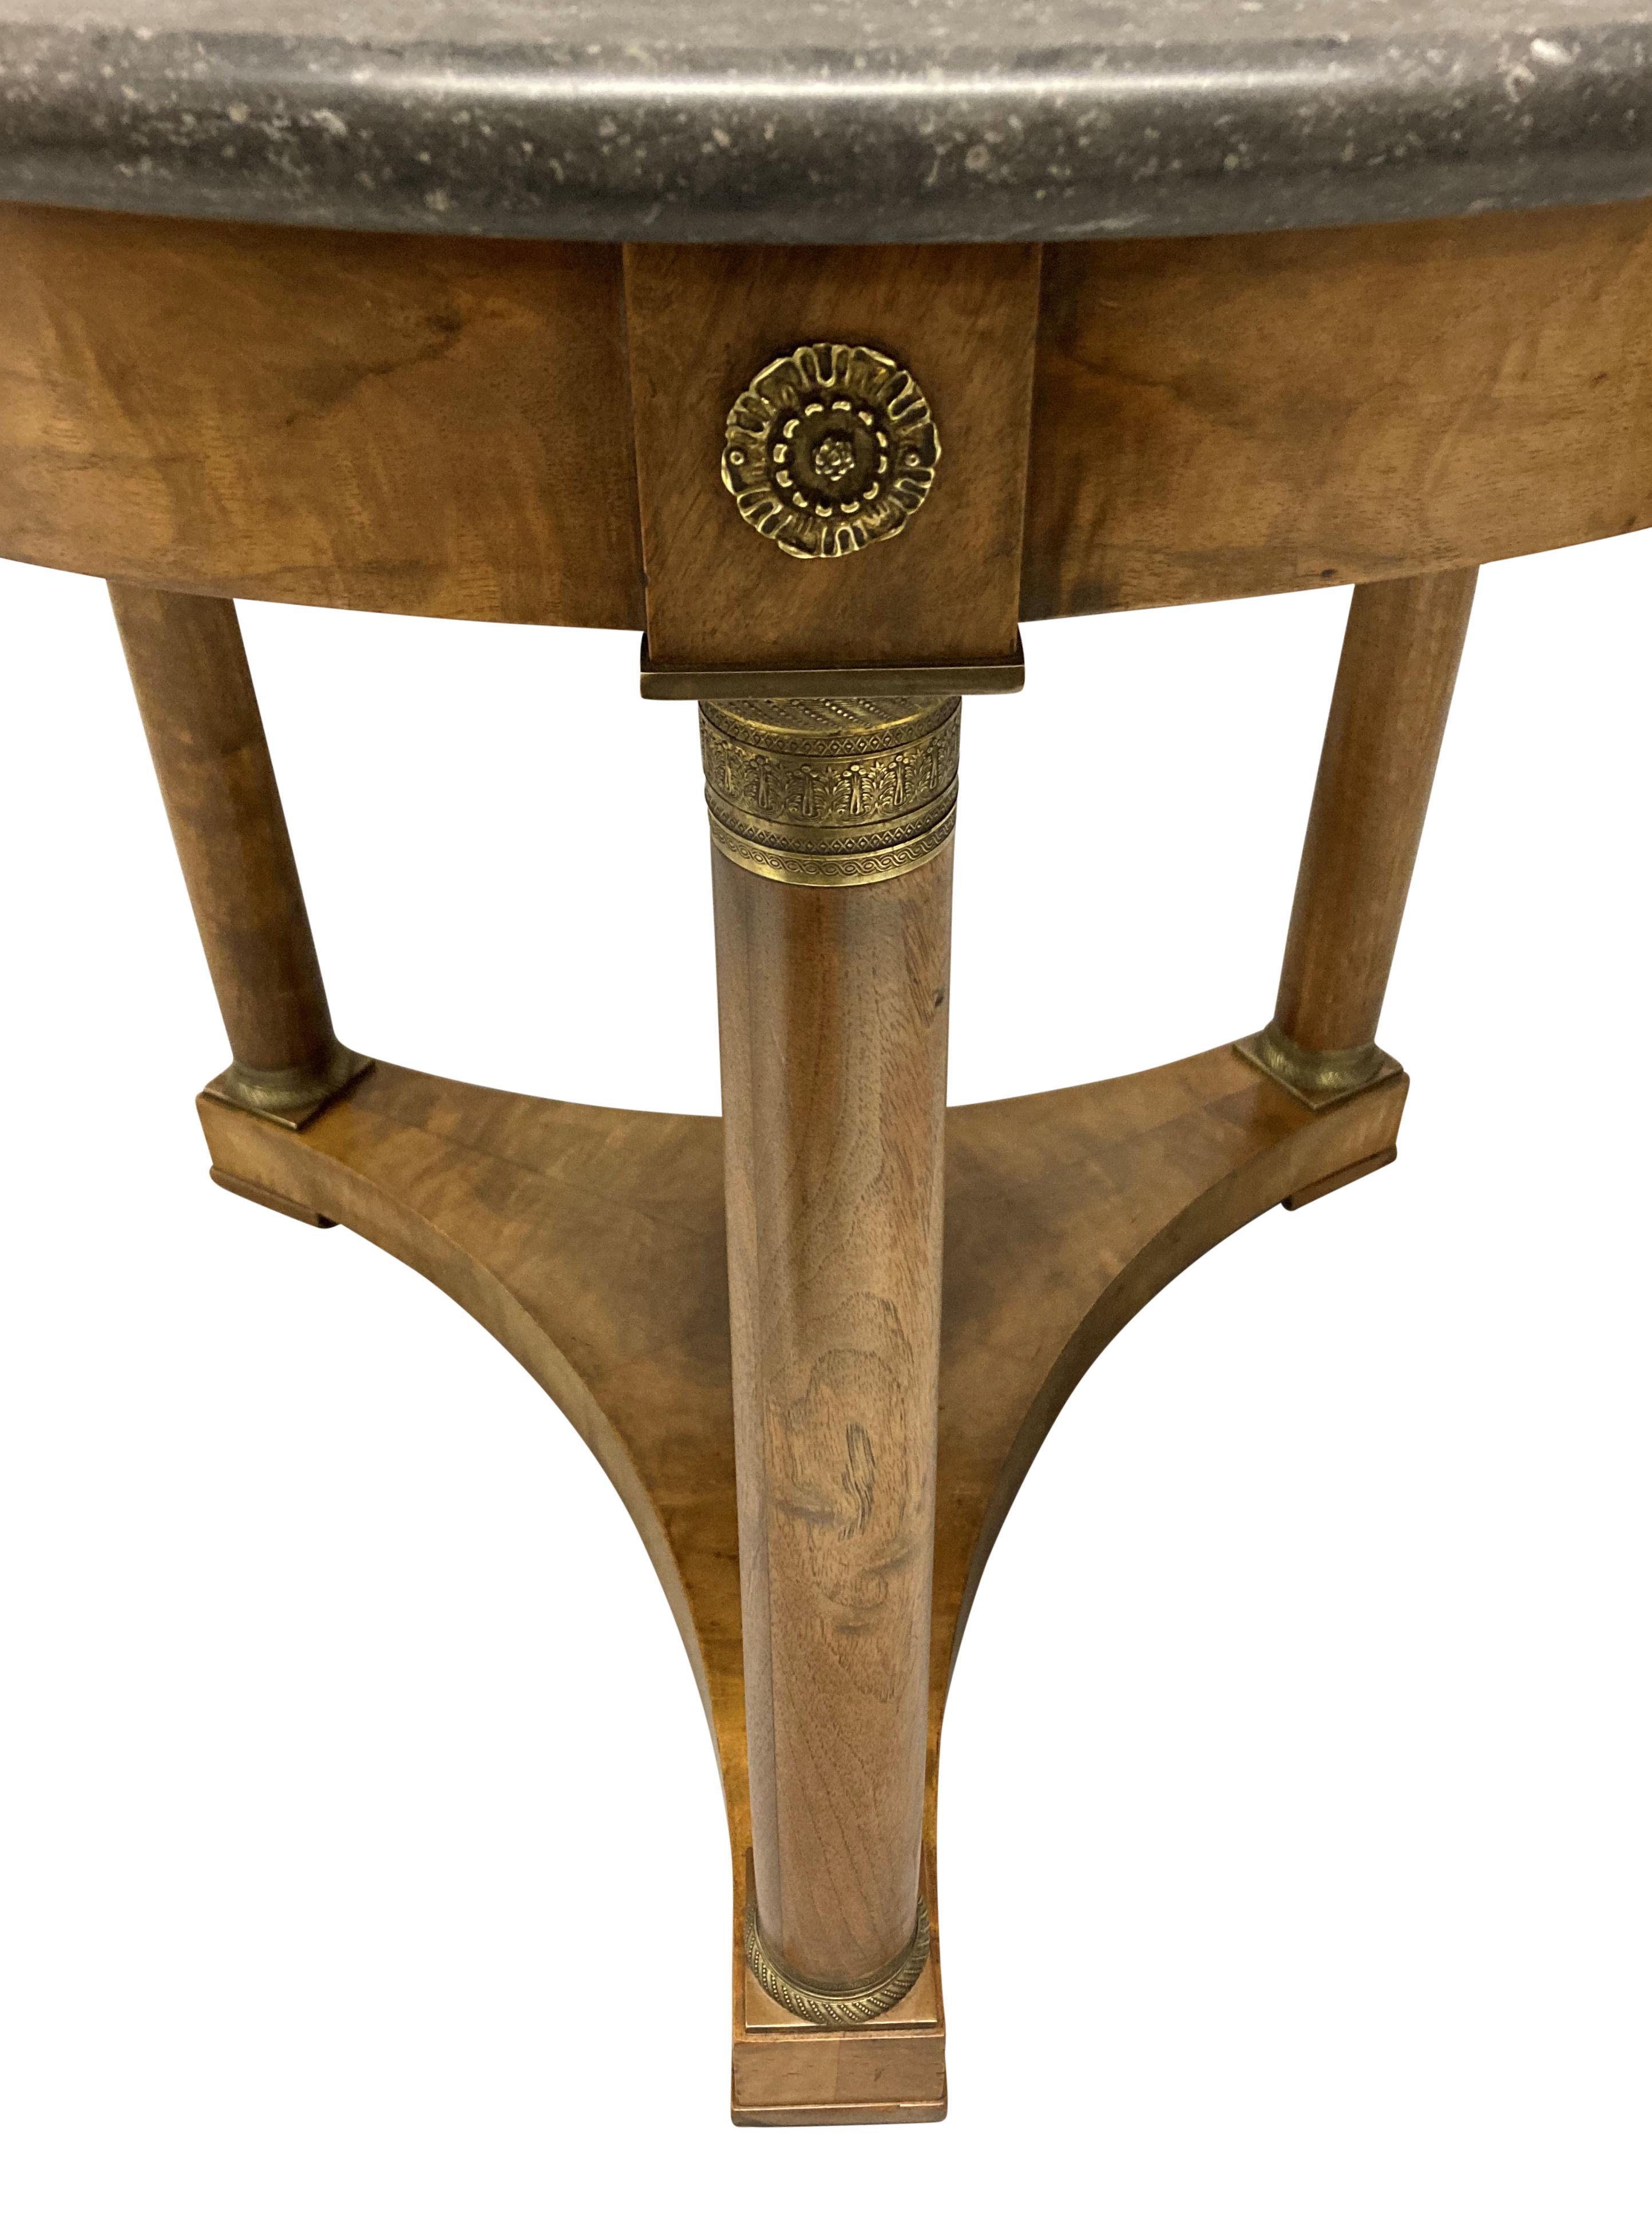 A French Empire style gueridon table in faded mahogany, with brass mounts and a grey marble top.